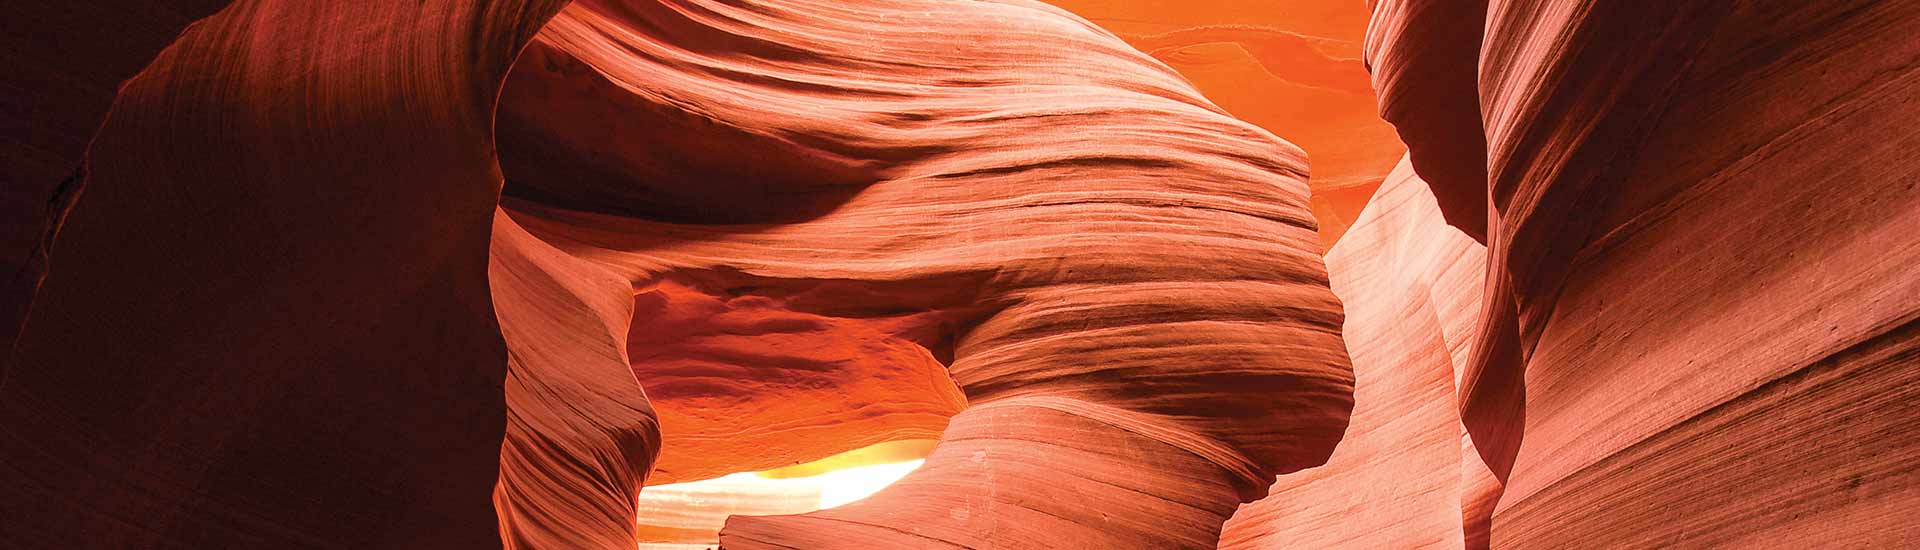 Swirling  orange and red rock formations in Lower Antelope Canyon, Arizona, USA.